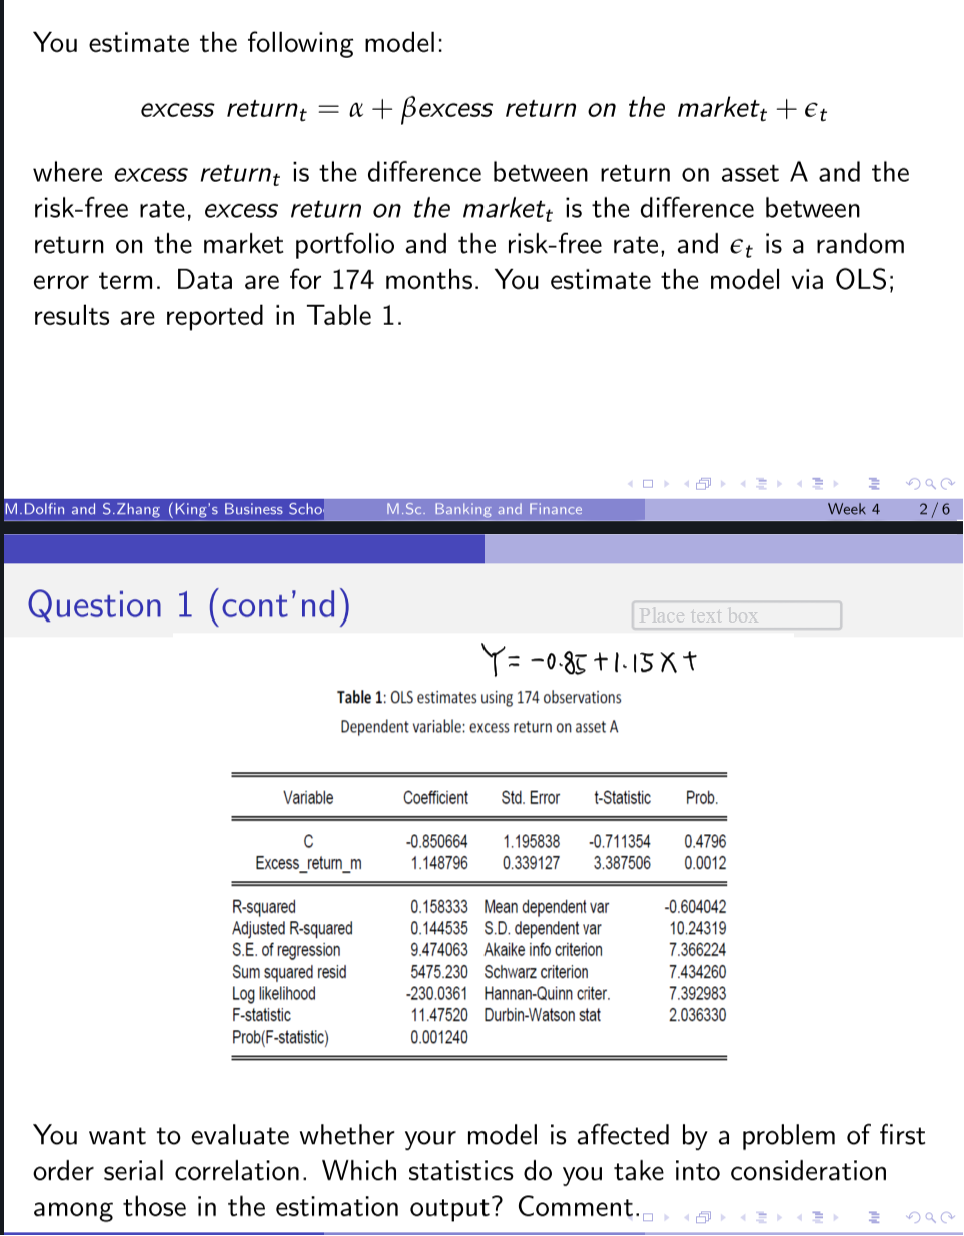 You estimate the following model:
excess returnt = a + ßexcess return on the markett + €t
where excess return is the difference between return on asset A and the
risk-free rate, excess return on the market is the difference between
return on the market portfolio and the risk-free rate, and et is a random
error term. Data are for 174 months. You estimate the model via OLS;
results are reported in Table 1.
M.Dolfin and S.Zhang (King's Business Scho
Question 1 (cont'nd)
Variable
C
Excess_return_m
M.Sc. Banking and Finance
Table 1: OLS estimates using 174 observations
Dependent variable: excess return on asset A
R-squared
Adjusted R-squared
S.E. of regression
Sum squared resid
Log likelihood
F-statistic
Prob(F-statistic)
Y = -0.85 +1.15x+
Place text box
Coefficient Std. Error t-Statistic
-0.850664 1.195838 -0.711354
1.148796 0.339127 3.387506
0.158333 Mean dependent var
0.144535 S.D. dependent var
9.474063 Akaike info criterion
5475.230 Schwarz criterion
-230.0361 Hannan-Quinn criter.
11.47520 Durbin-Watson stat
0.001240
Prob.
0.4796
0.0012
-0.604042
10.24319
7.366224
7.434260
7.392983
2.036330
Week 4
S92
2/6
You want to evaluate whether your model is affected by a problem of first
order serial correlation. Which statistics do you take into consideration
among those in the estimation output? Comment.
2
592